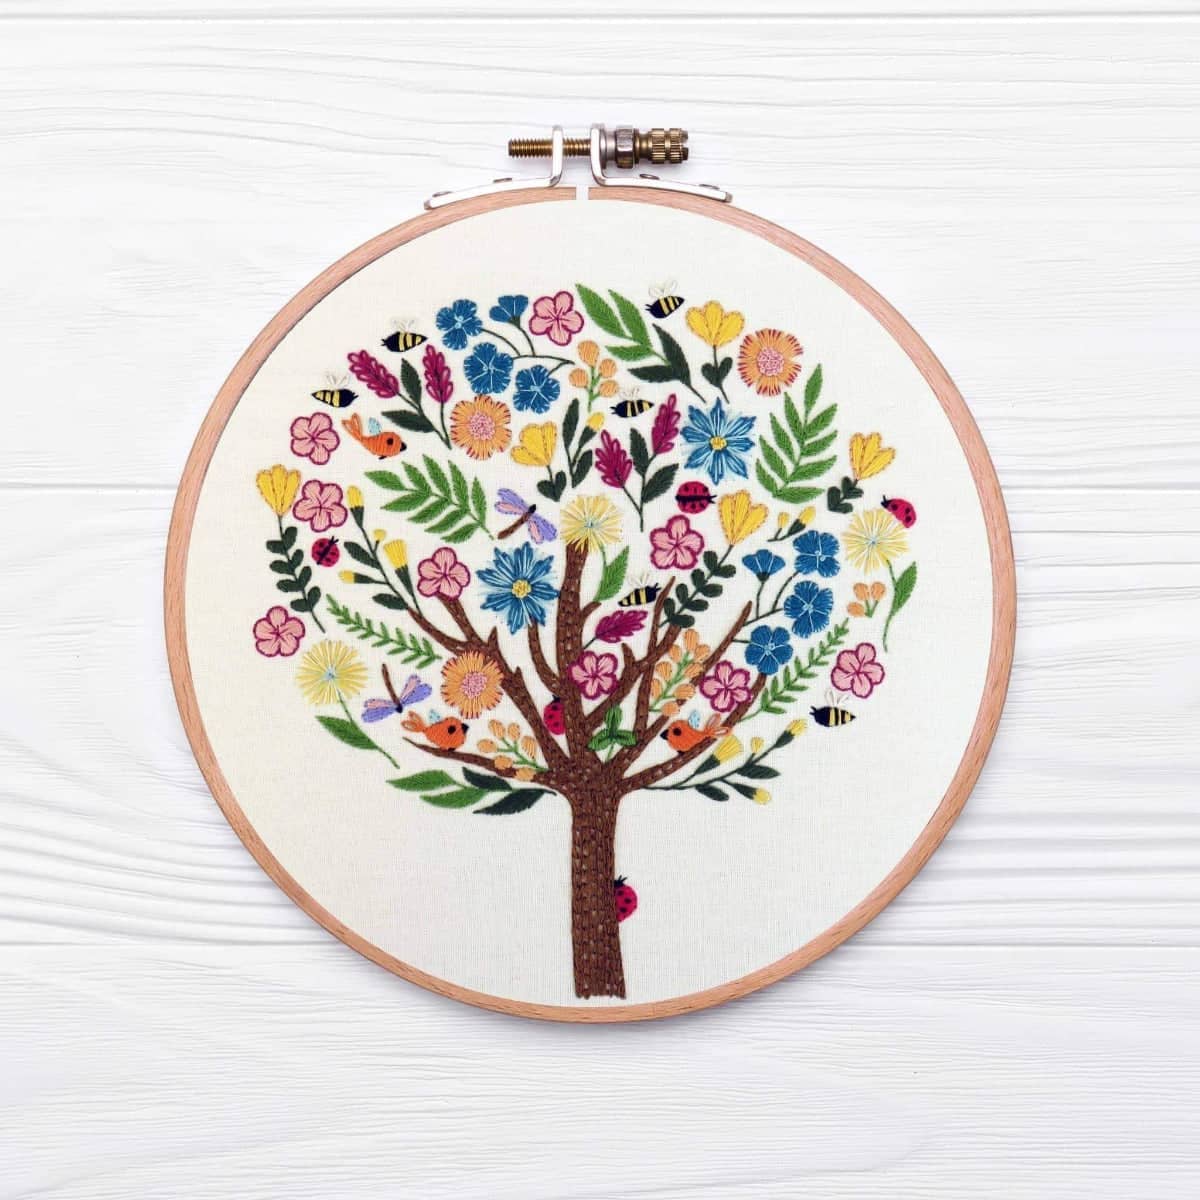 Bugs in Bloom, Pre Printed Embroidery Fabric Panel PLUS PDF Pattern , Pre Printed Fabric Pattern , StitchDoodles , bird embroidery, Embroidery, embroidery hoop, embroidery hoop kit, Embroidery Kit, embroidery kit for adults, embroidery kit fro beginners, embroidery pattern, garden embroidery, hand embroidery, hand embroidery fabric, hand embroidery kit, hand embroidery seat frame, modern embroidery kits, nurge embroidery hoop, PDF pattern, Printed Pattern , StitchDoodles , shop.stitchdoodles.com